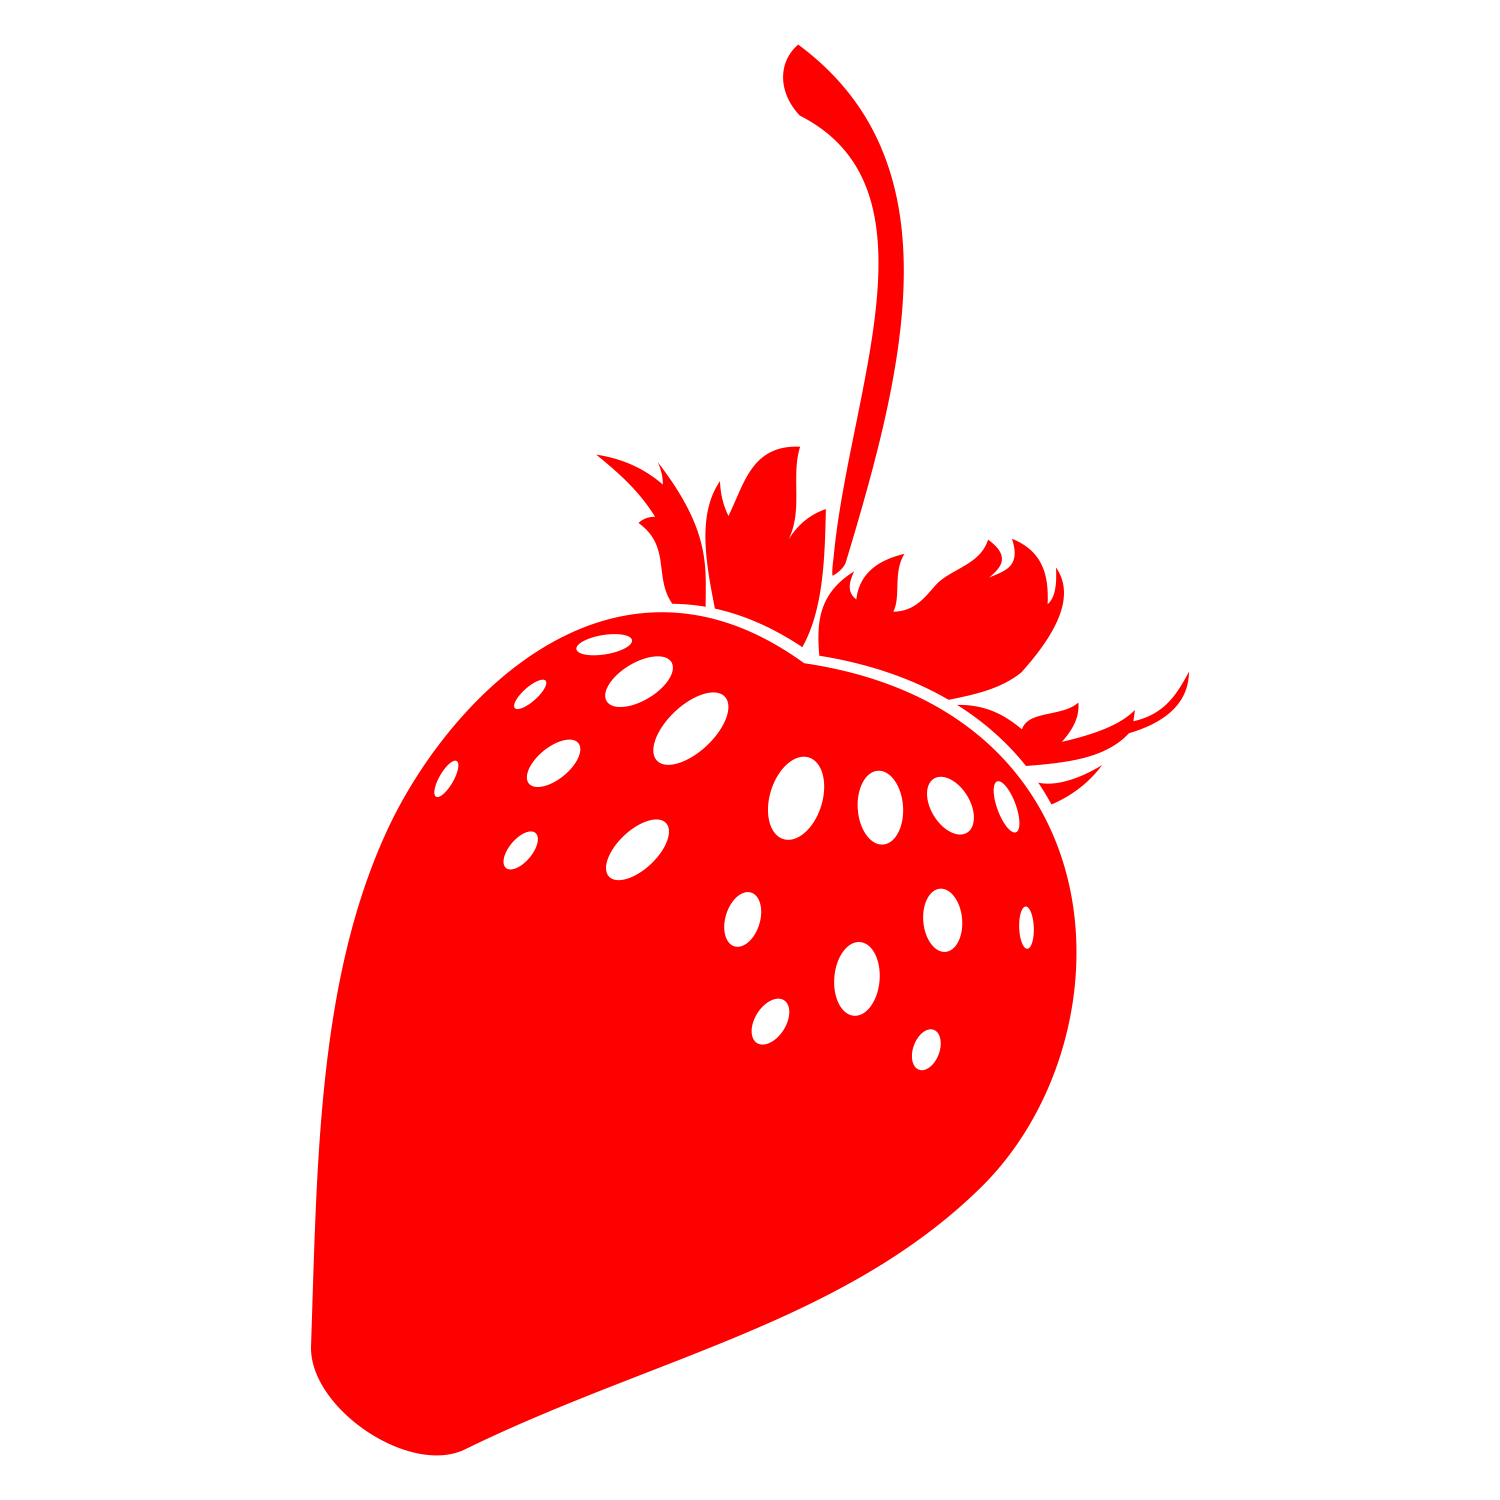 Download Vector for free use: Red strawberry vector